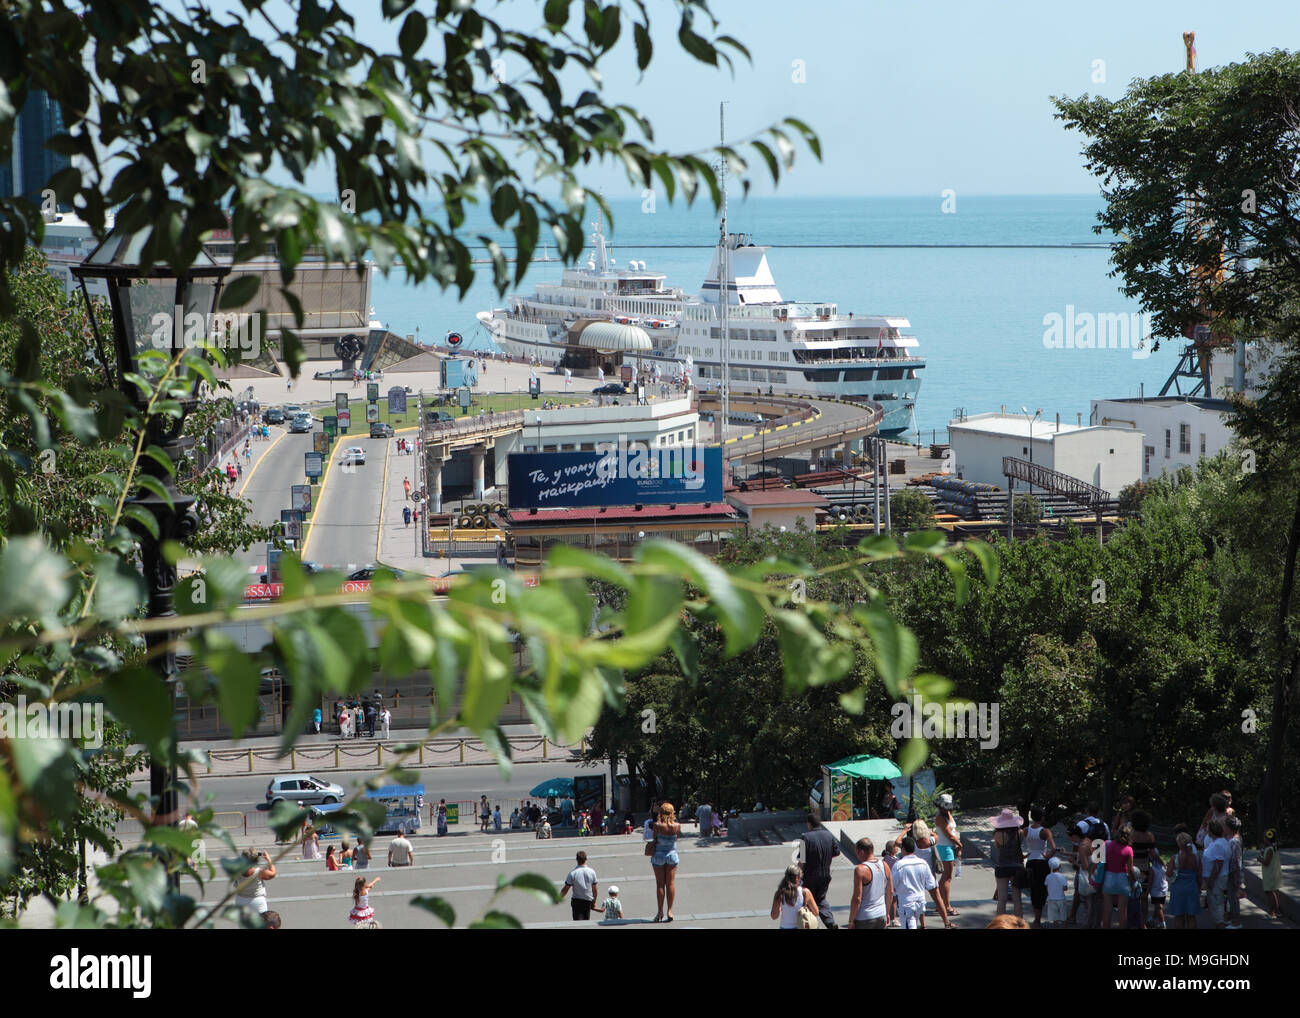 Odessa, Ukraine - July 22, 2012: People descending to the port where the passenger ship is moored. Stock Photo